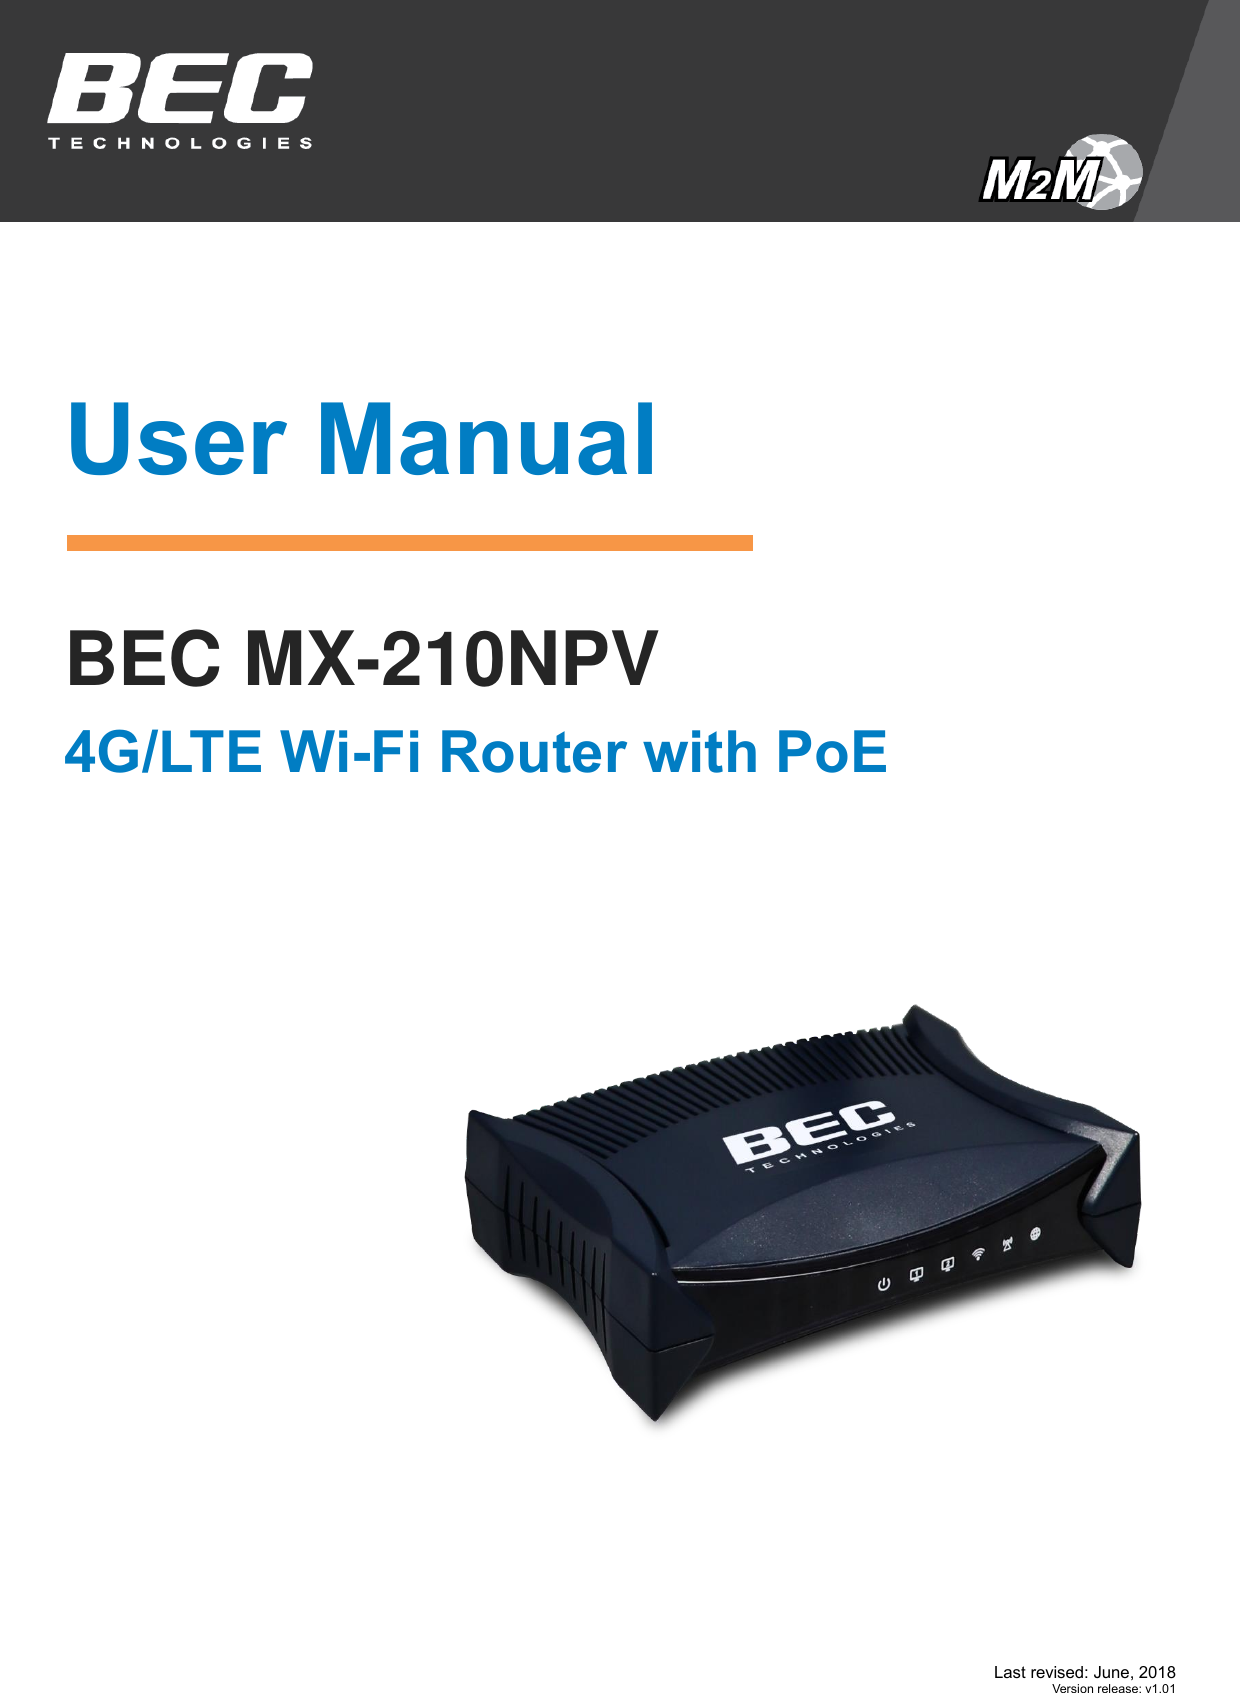  Last revised: June, 2018  Version release: v1.01         User Manual  BEC MX-210NPV 4G/LTE Wi-Fi Router with PoE              